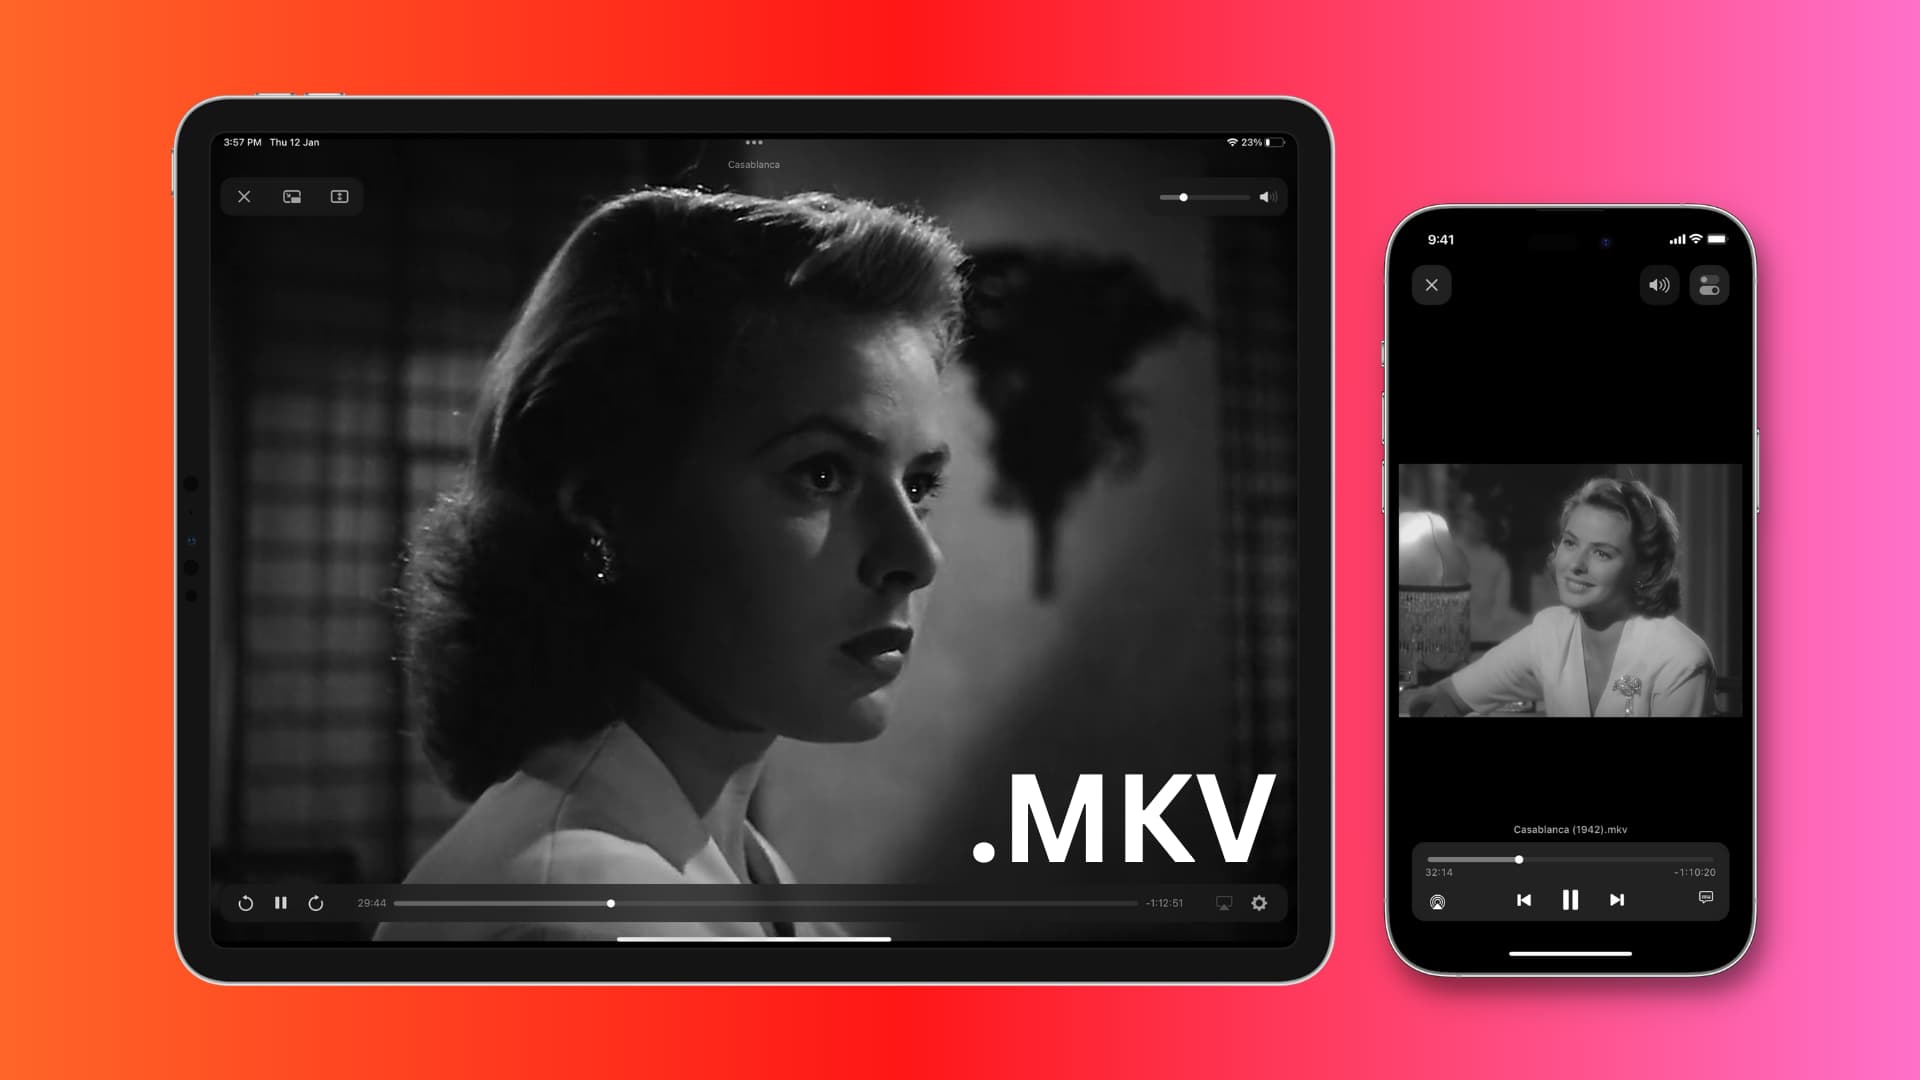 How to play MKV videos on iPhone, iPad, Mac, Android, Windows PC, and TV